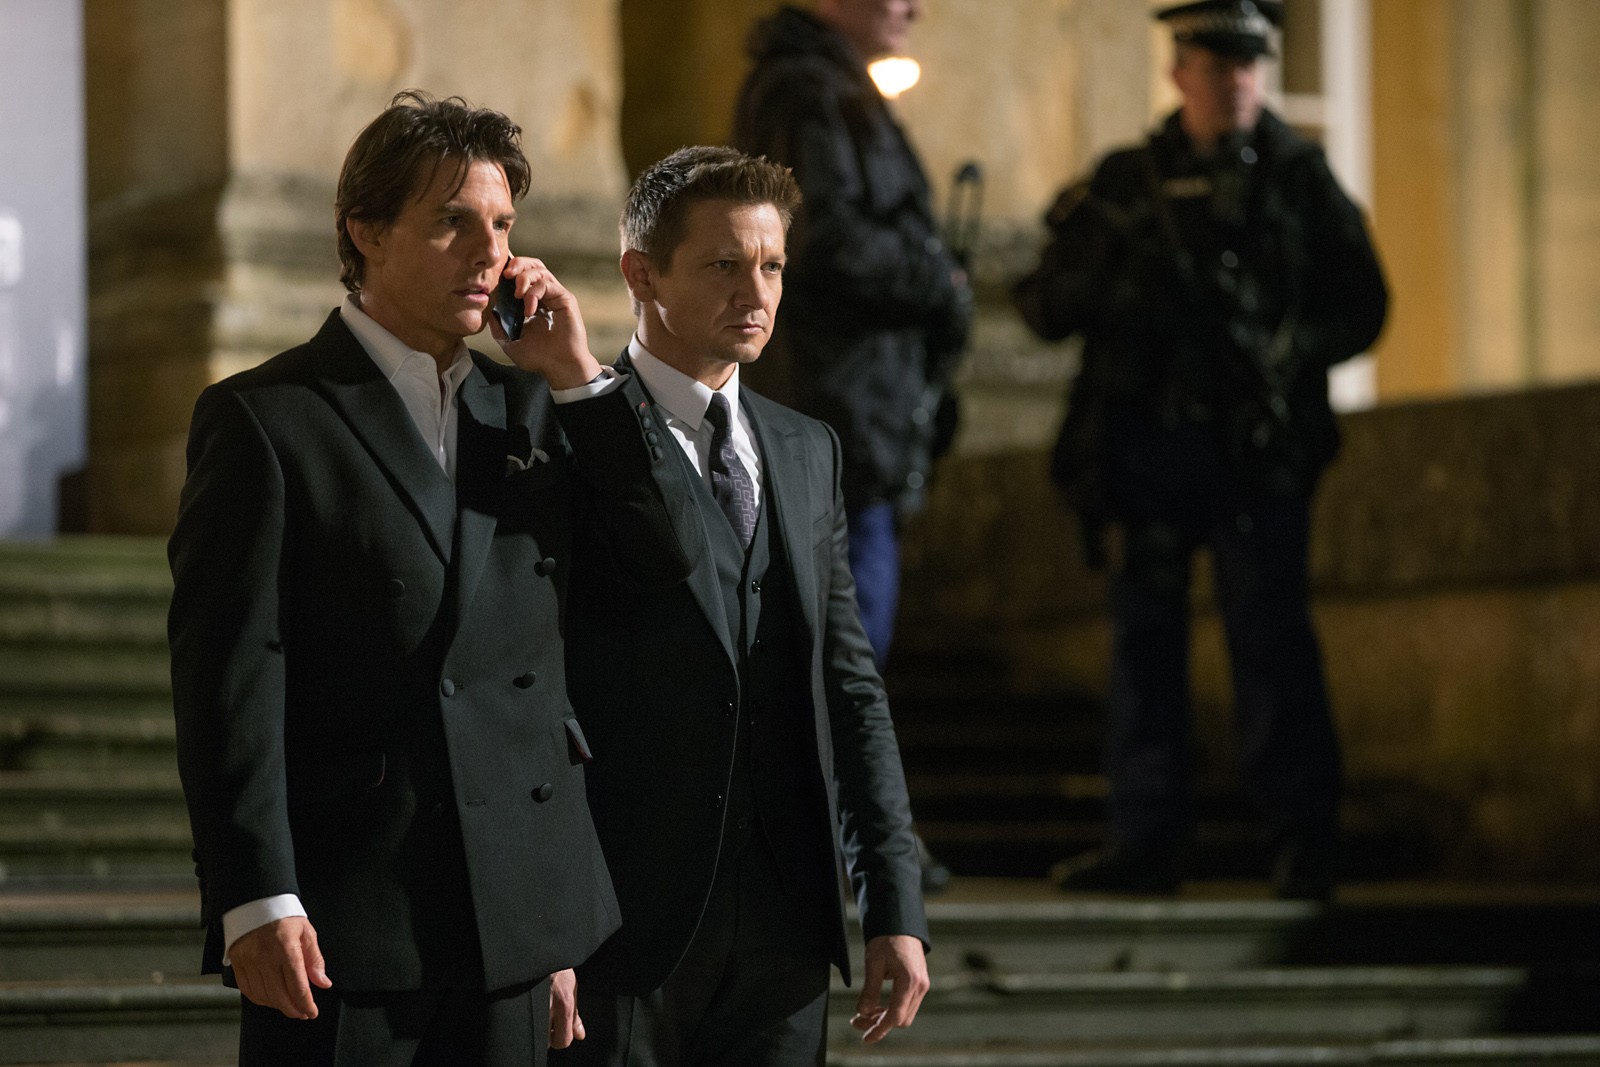 Tom Cruise and Jeremy Renner as Ethan Hunt and William Brandt in Mission: Impossible 5 | Paramount Pictures